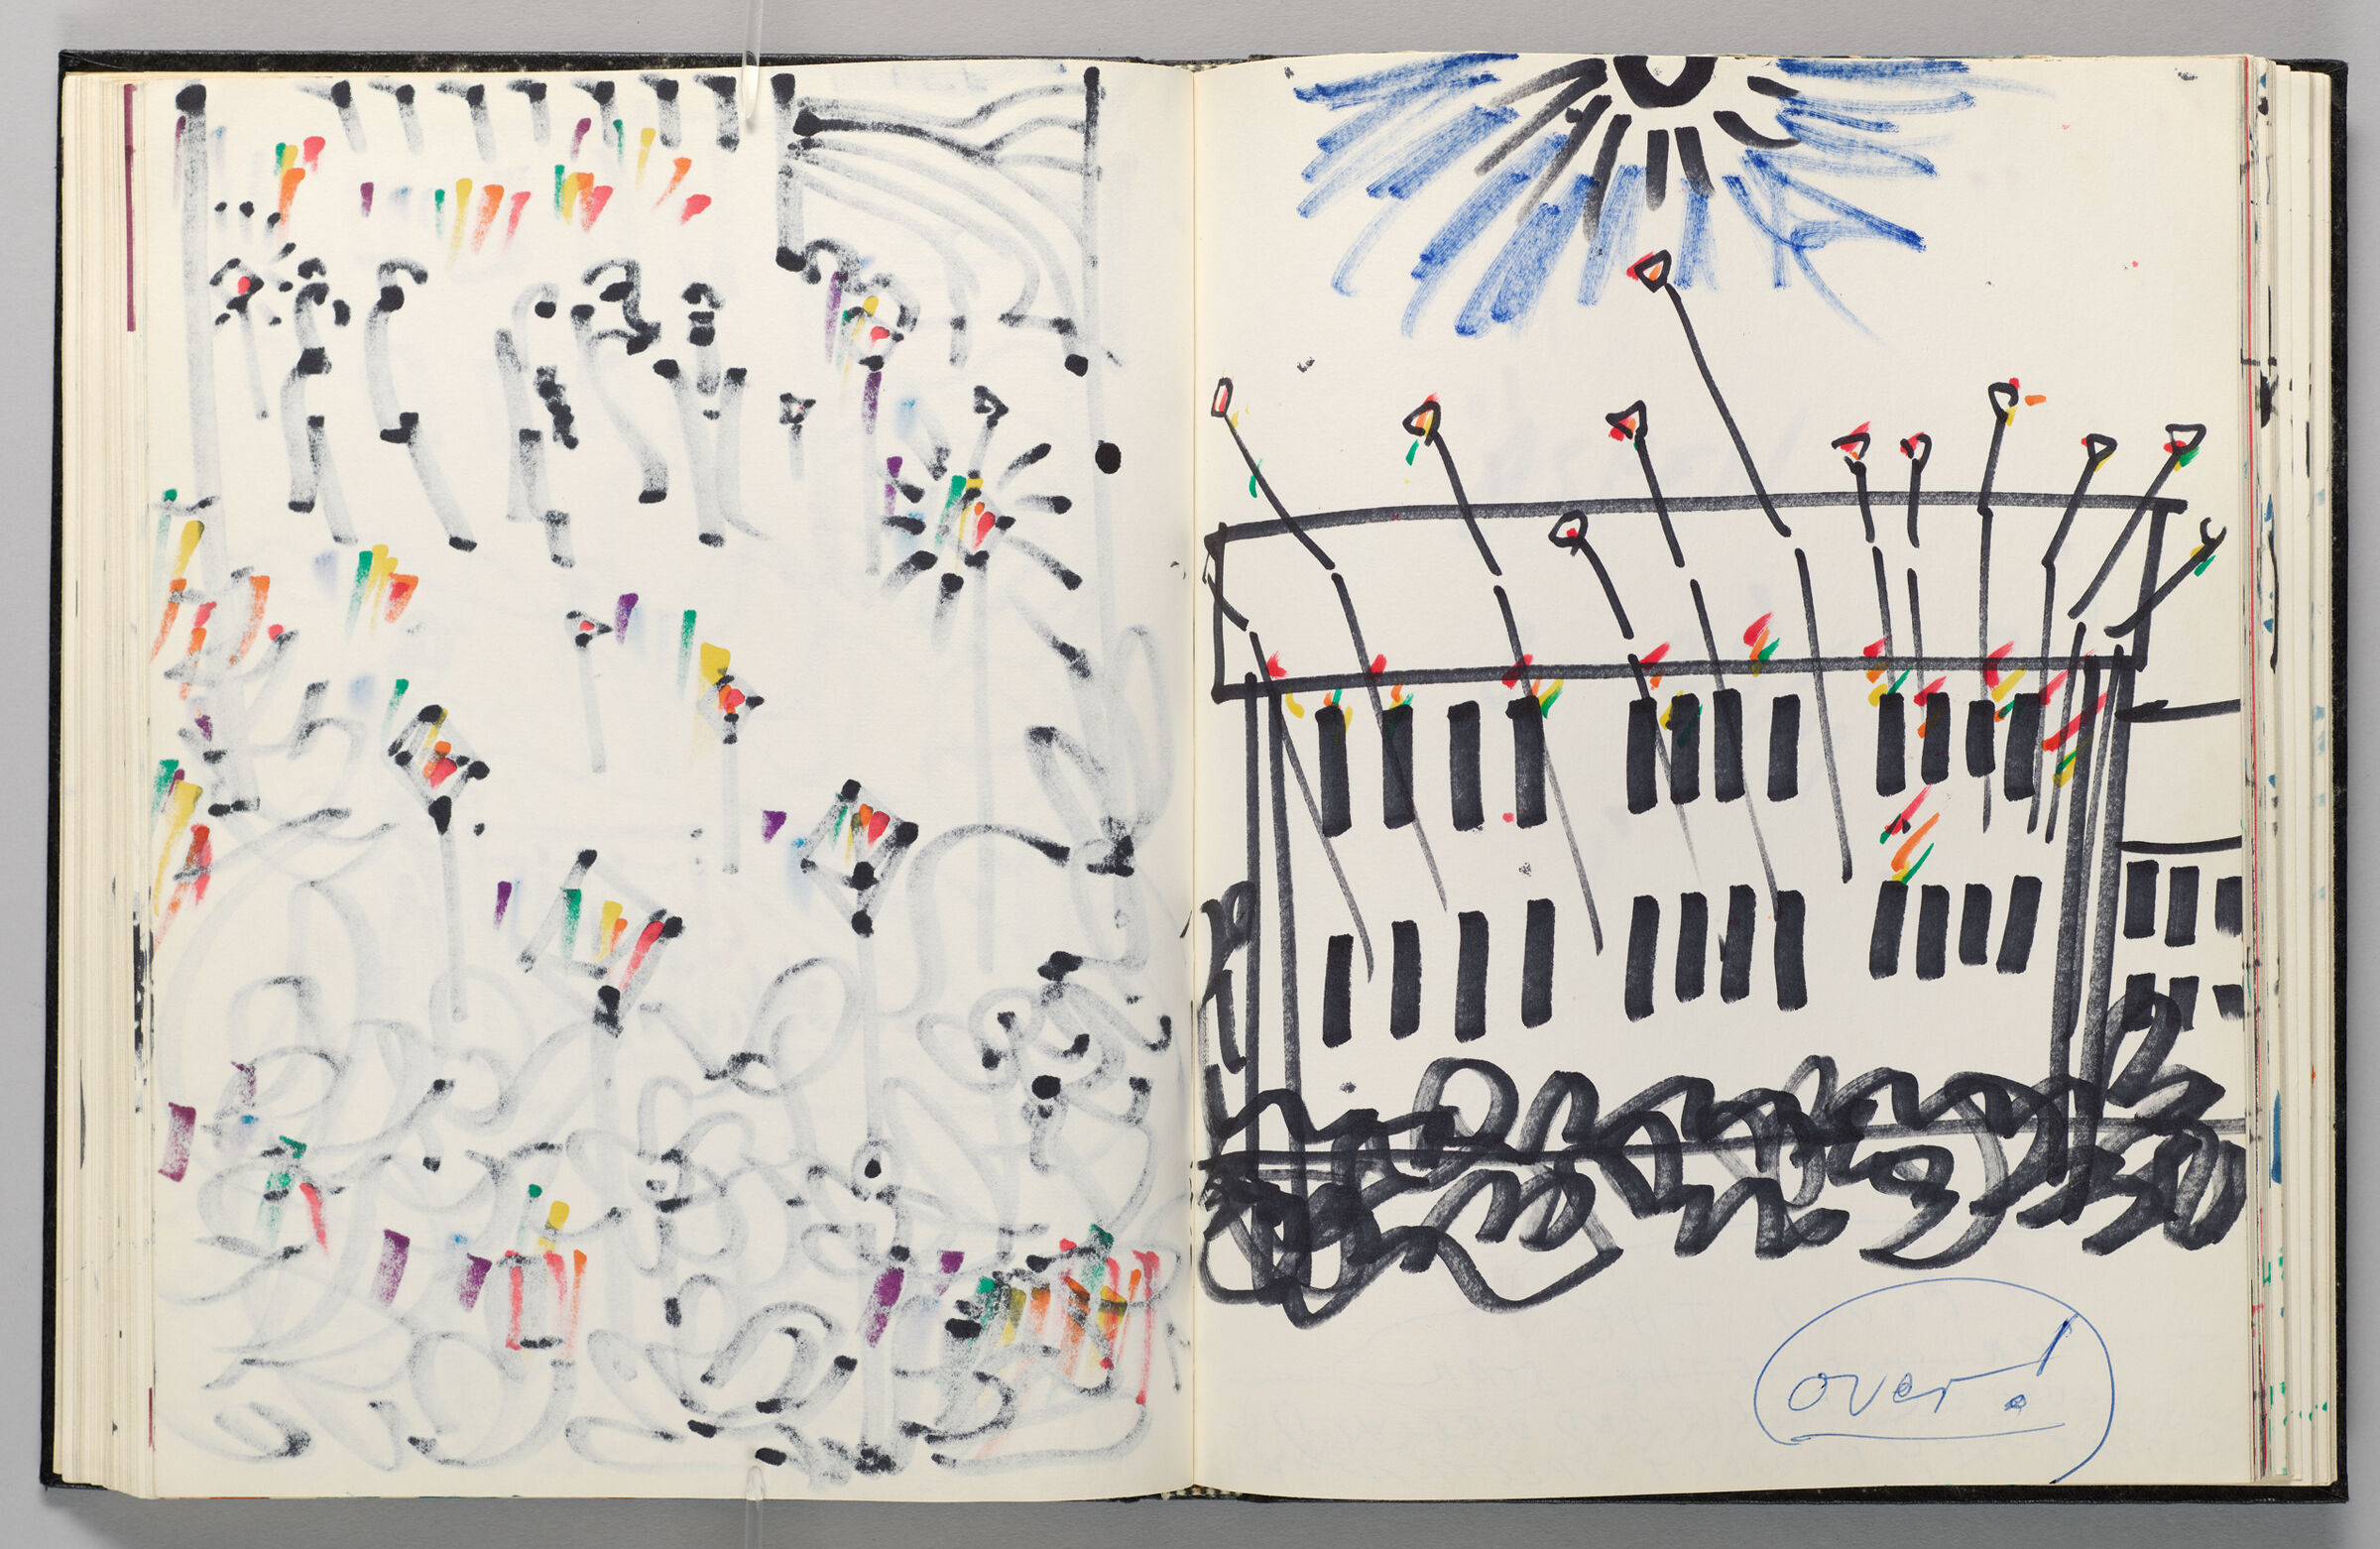 Untitled (Bleed-Through Of Previous Page, Left Page); Untitled (Prisms Projecting From Facade, Right Page)